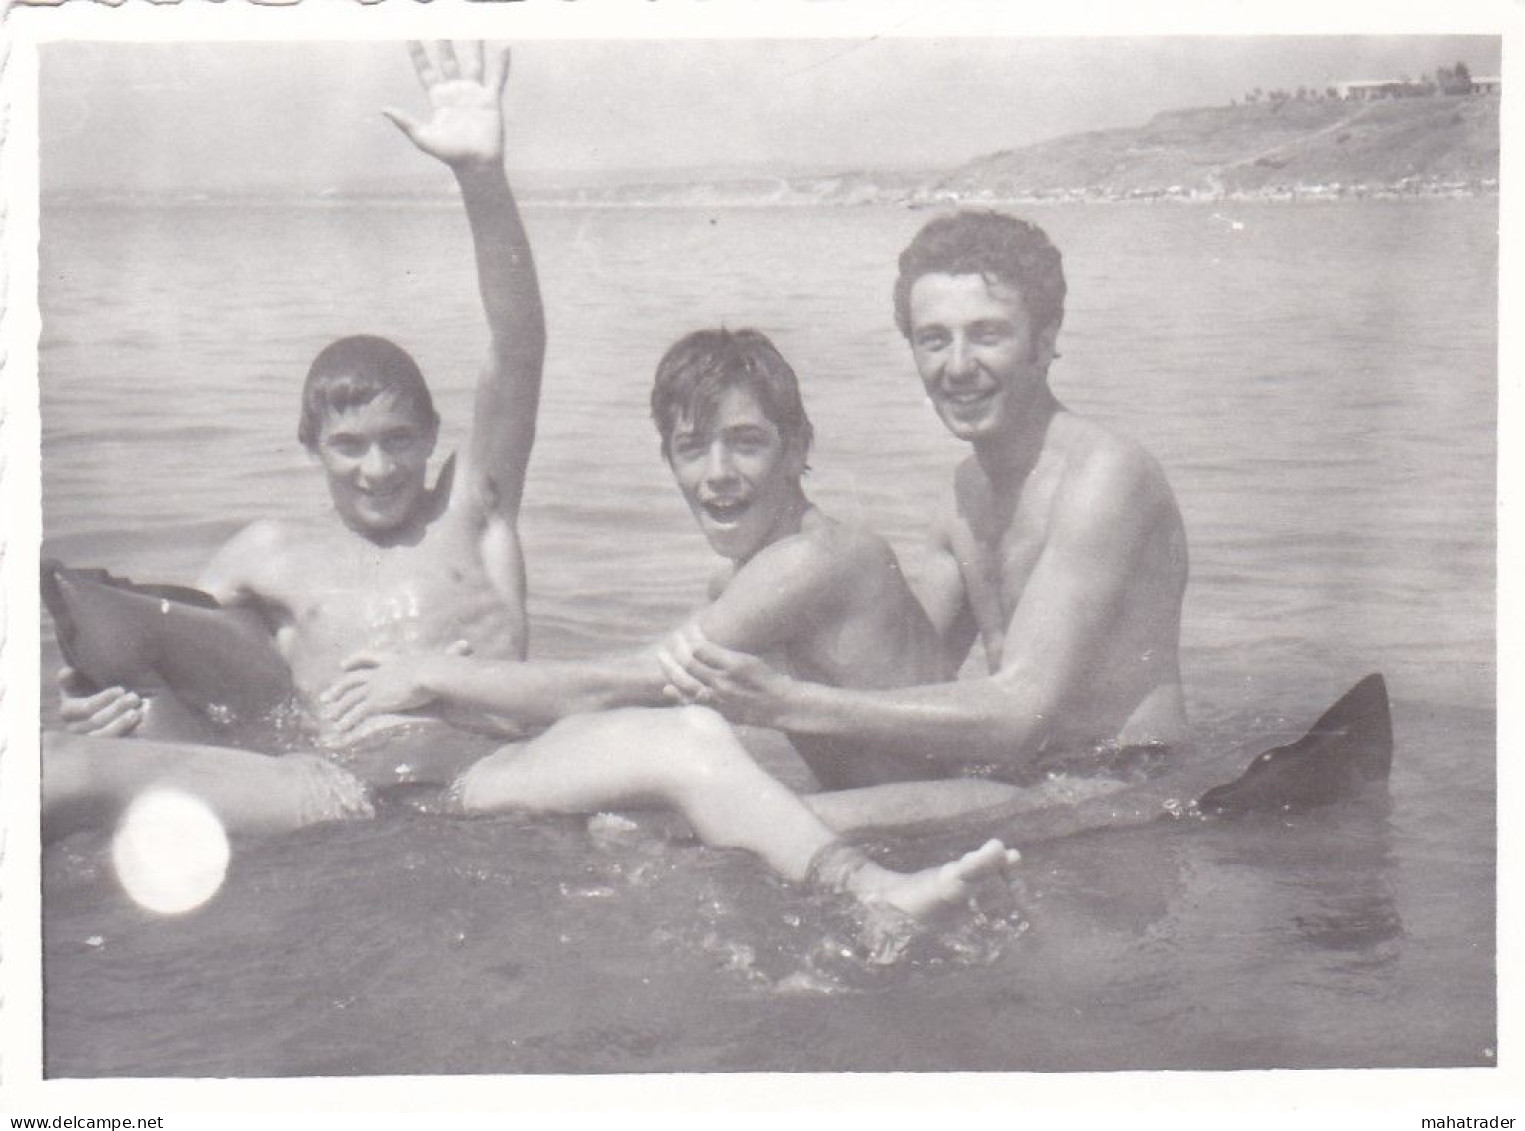 Old Real Original Photo - Naked Young Men Having Fun In The Sea - Ca. 8.5x6 Cm - Anonymous Persons